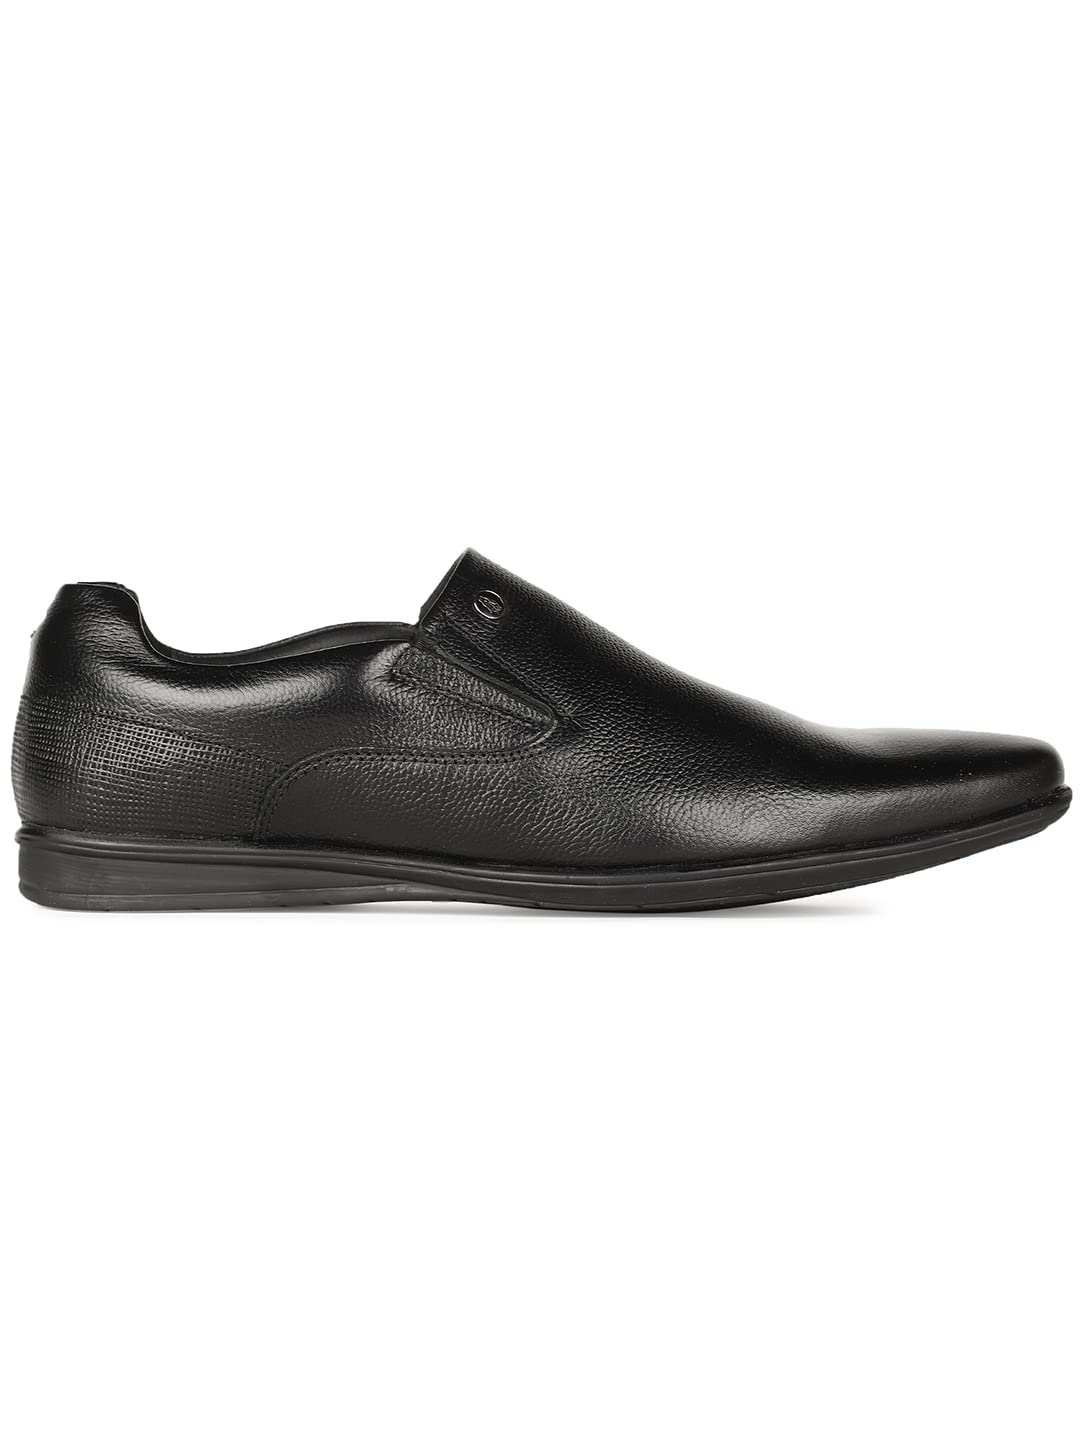 Hush Puppies MenCORSO Loafer Shoes UK 9 Color Black